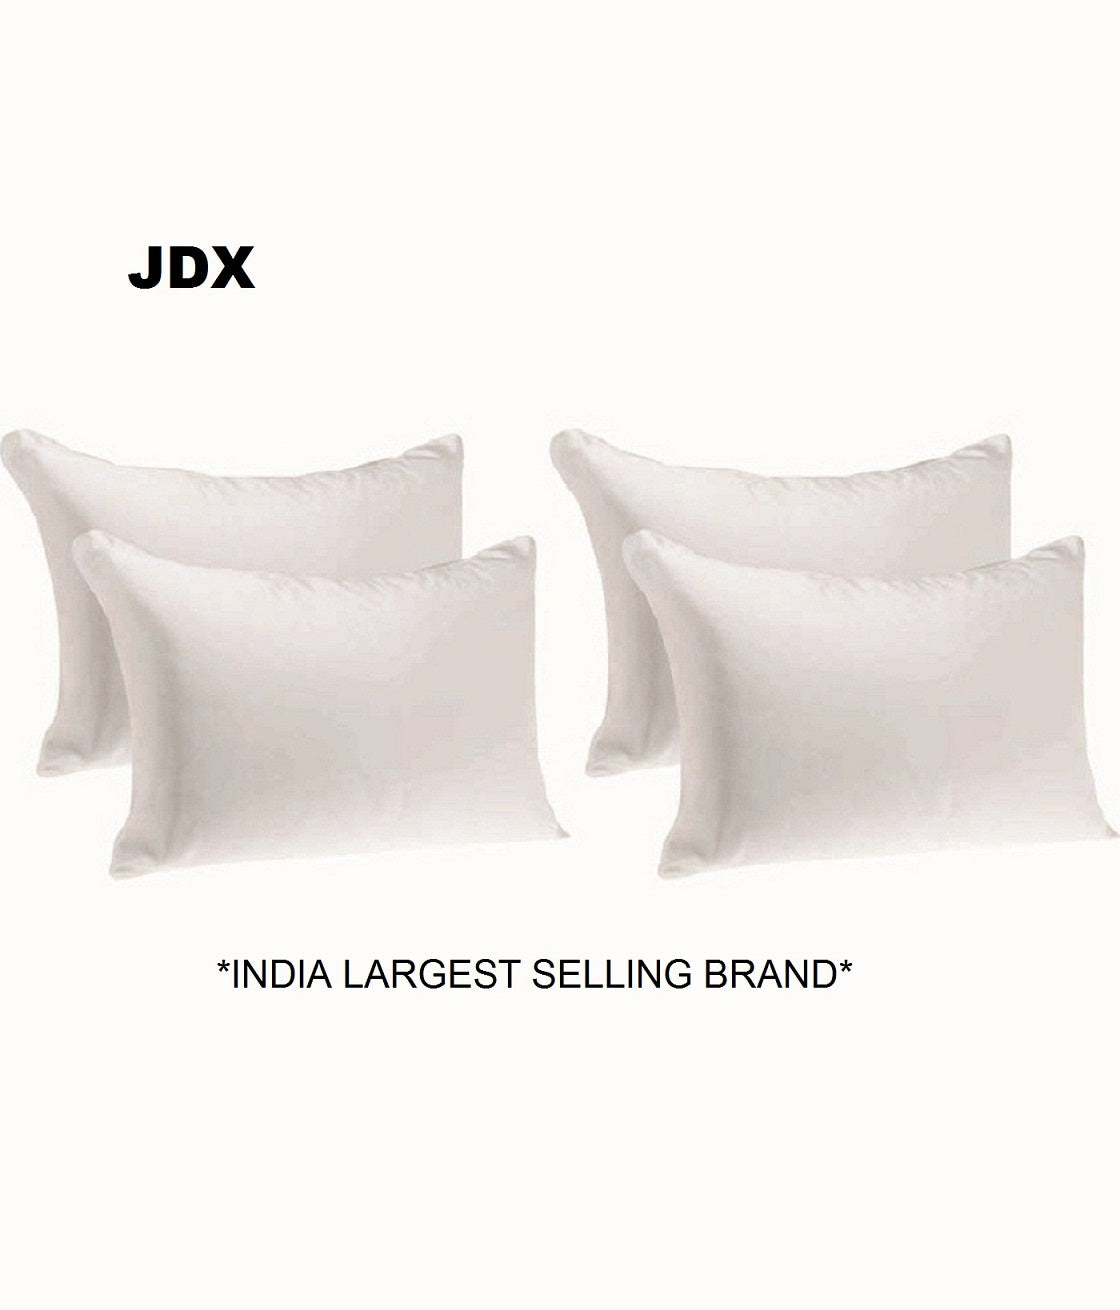 Luxurious Ultra Soft Microfiber Pillows for Sleeping White Set of 4 - JDX STORE